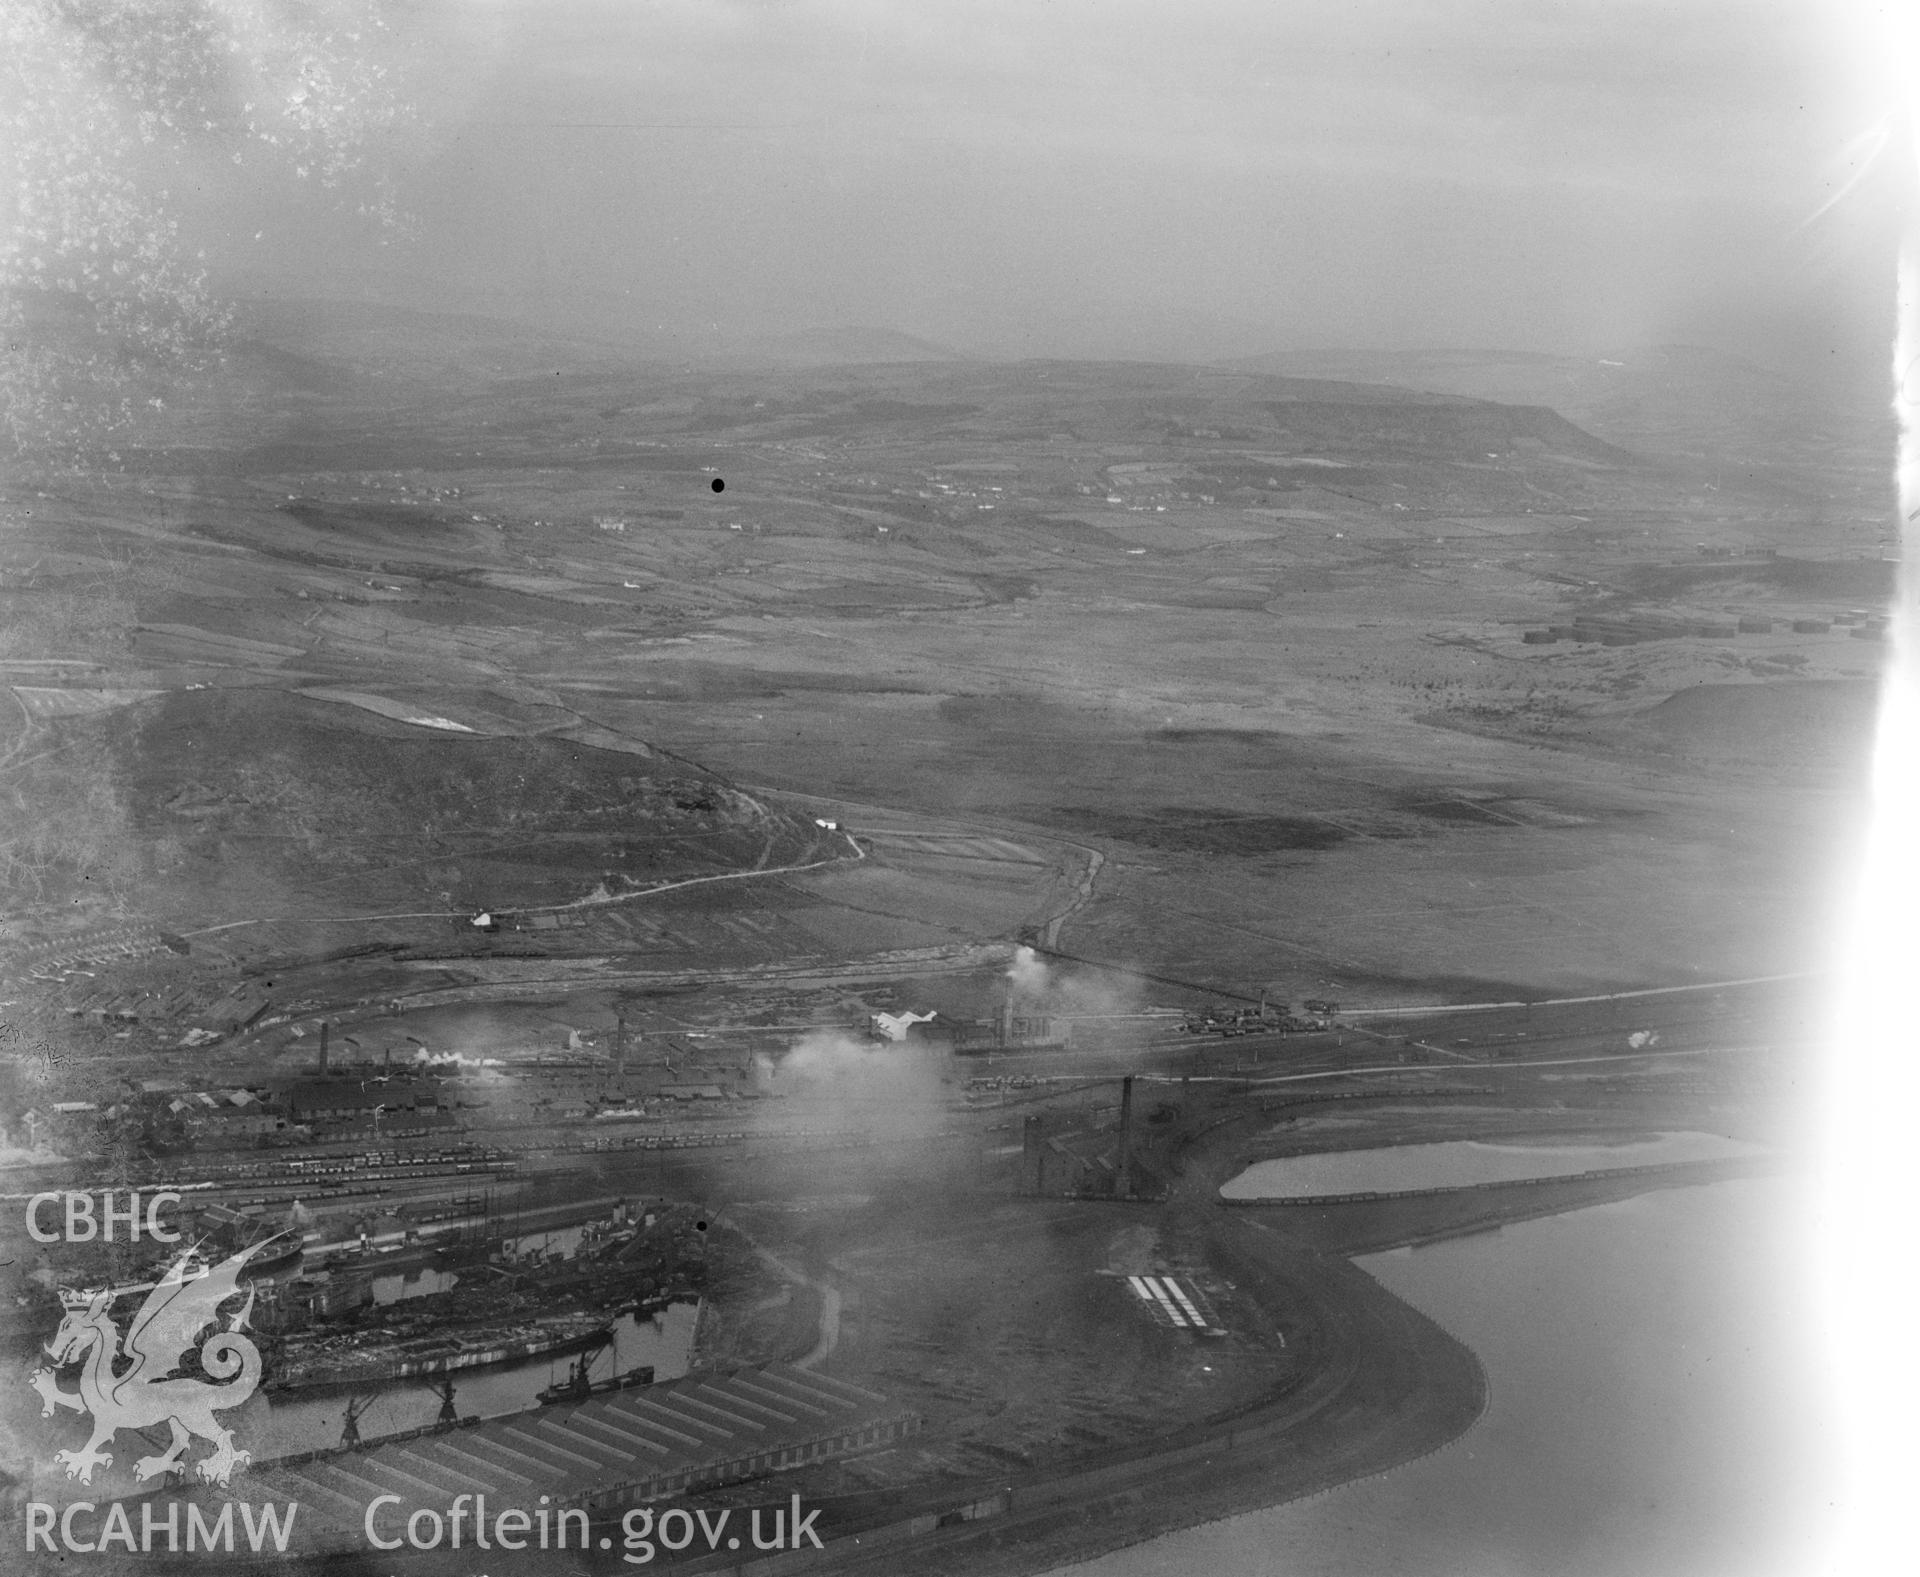 View of Swansea showing King's dock, oblique aerial view. 5?x4? black and white glass plate negative.